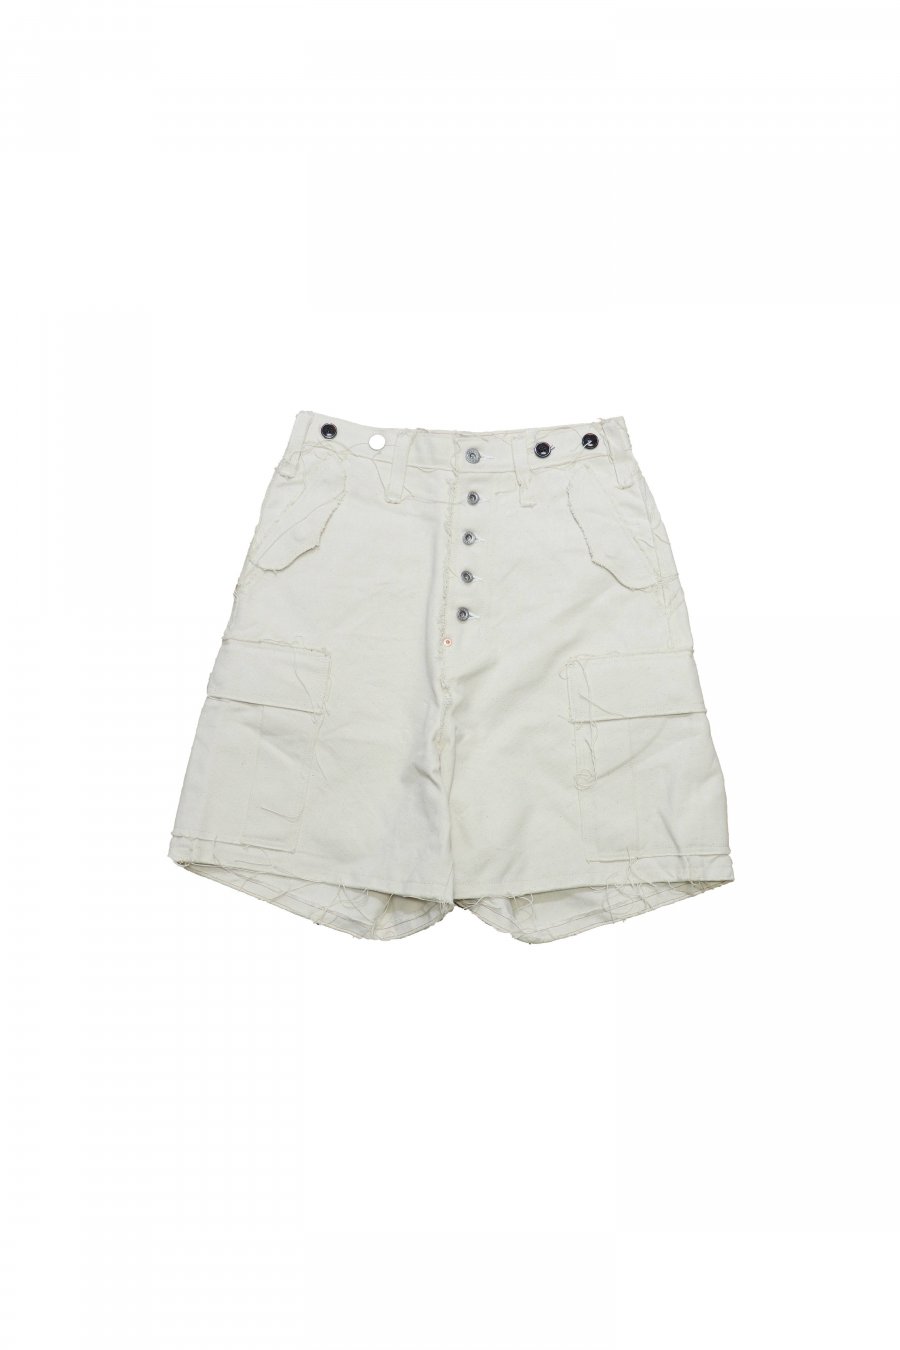 SUGARHILL  RAW-EDGE CANVAS CARGO SHORTS(IVORY WHITE)<img class='new_mark_img2' src='https://img.shop-pro.jp/img/new/icons15.gif' style='border:none;display:inline;margin:0px;padding:0px;width:auto;' />